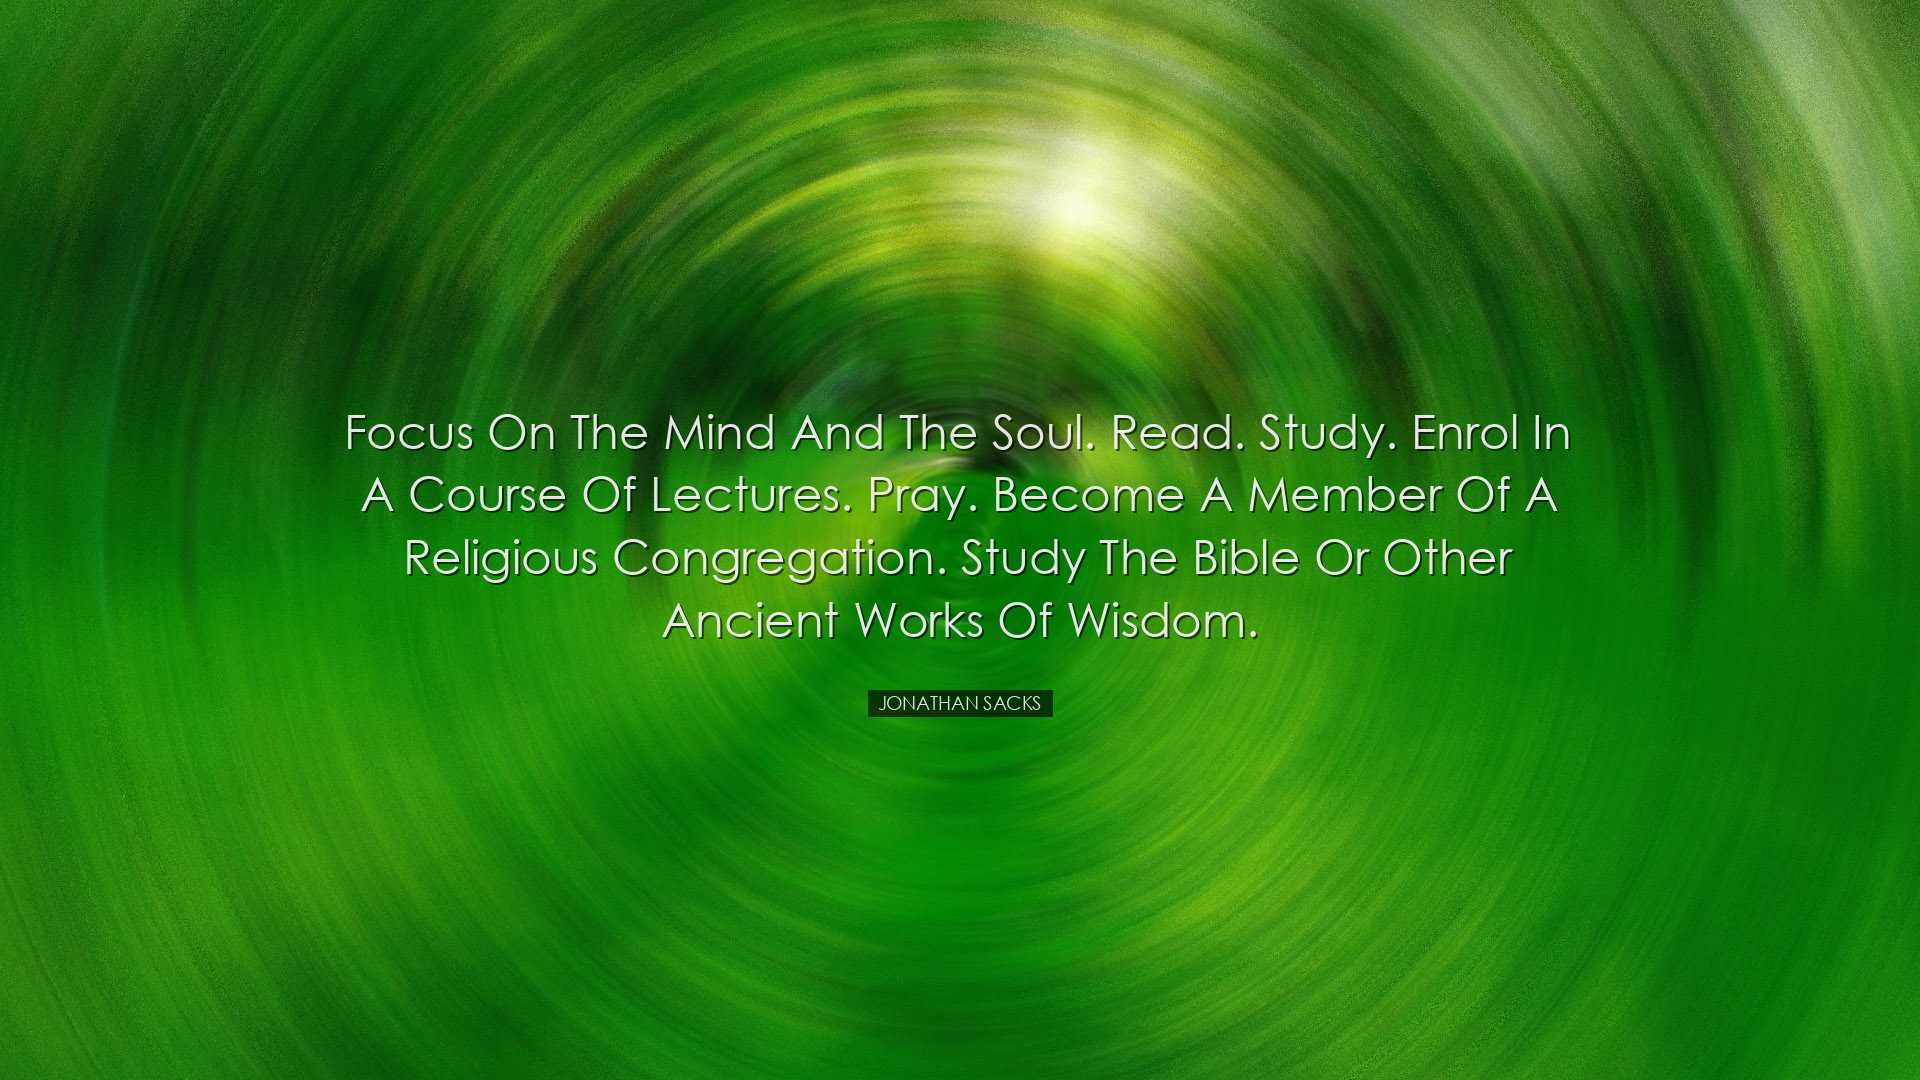 Focus on the mind and the soul. Read. Study. Enrol in a course of